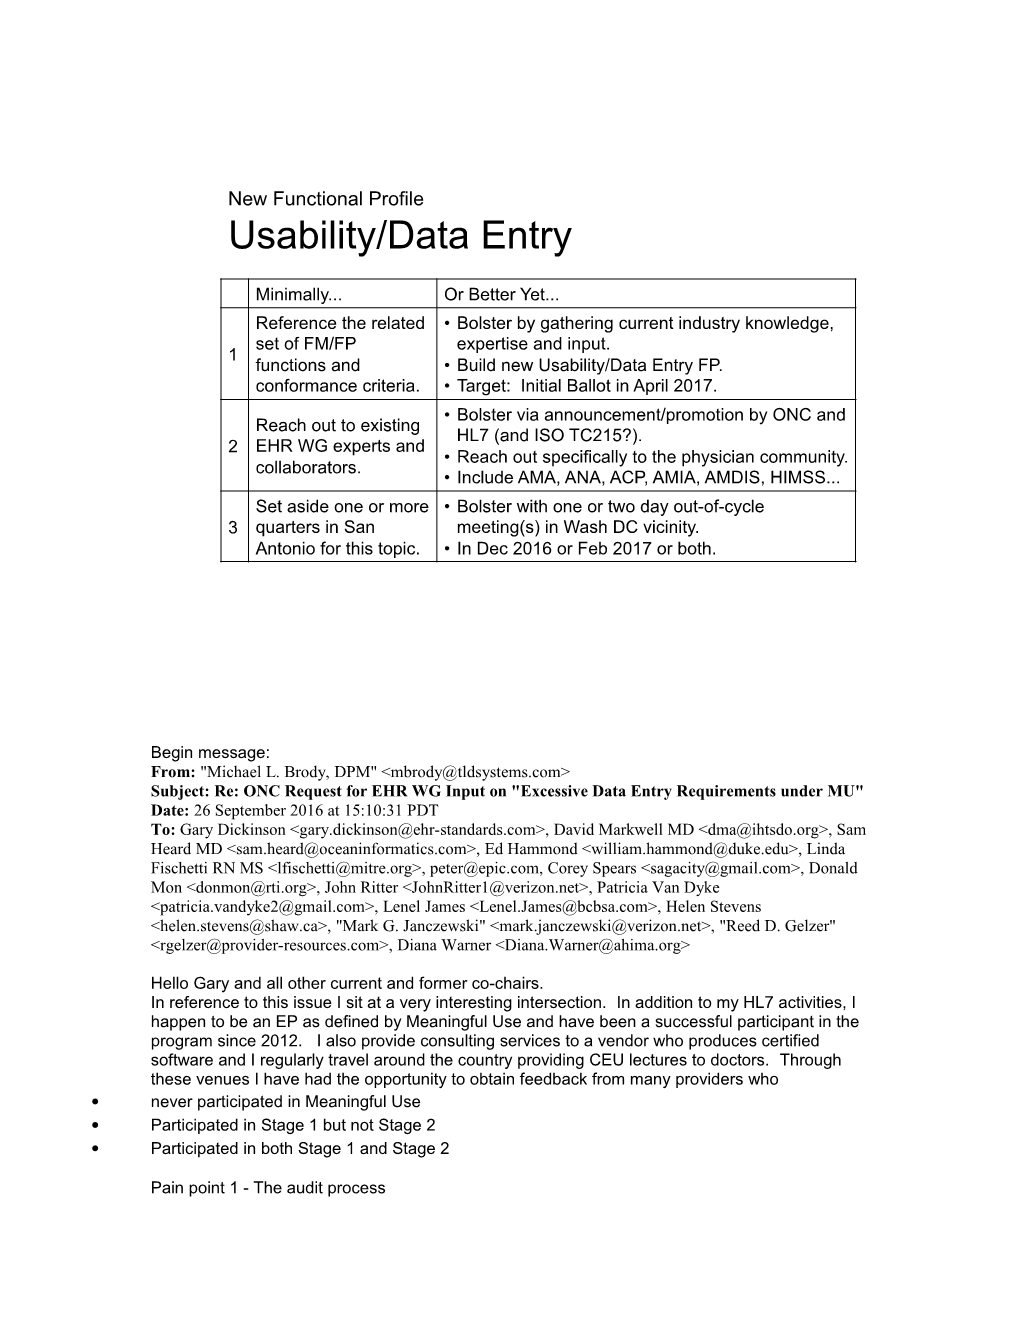 Excessive Data Entry Requirements Under US Meaningful Use